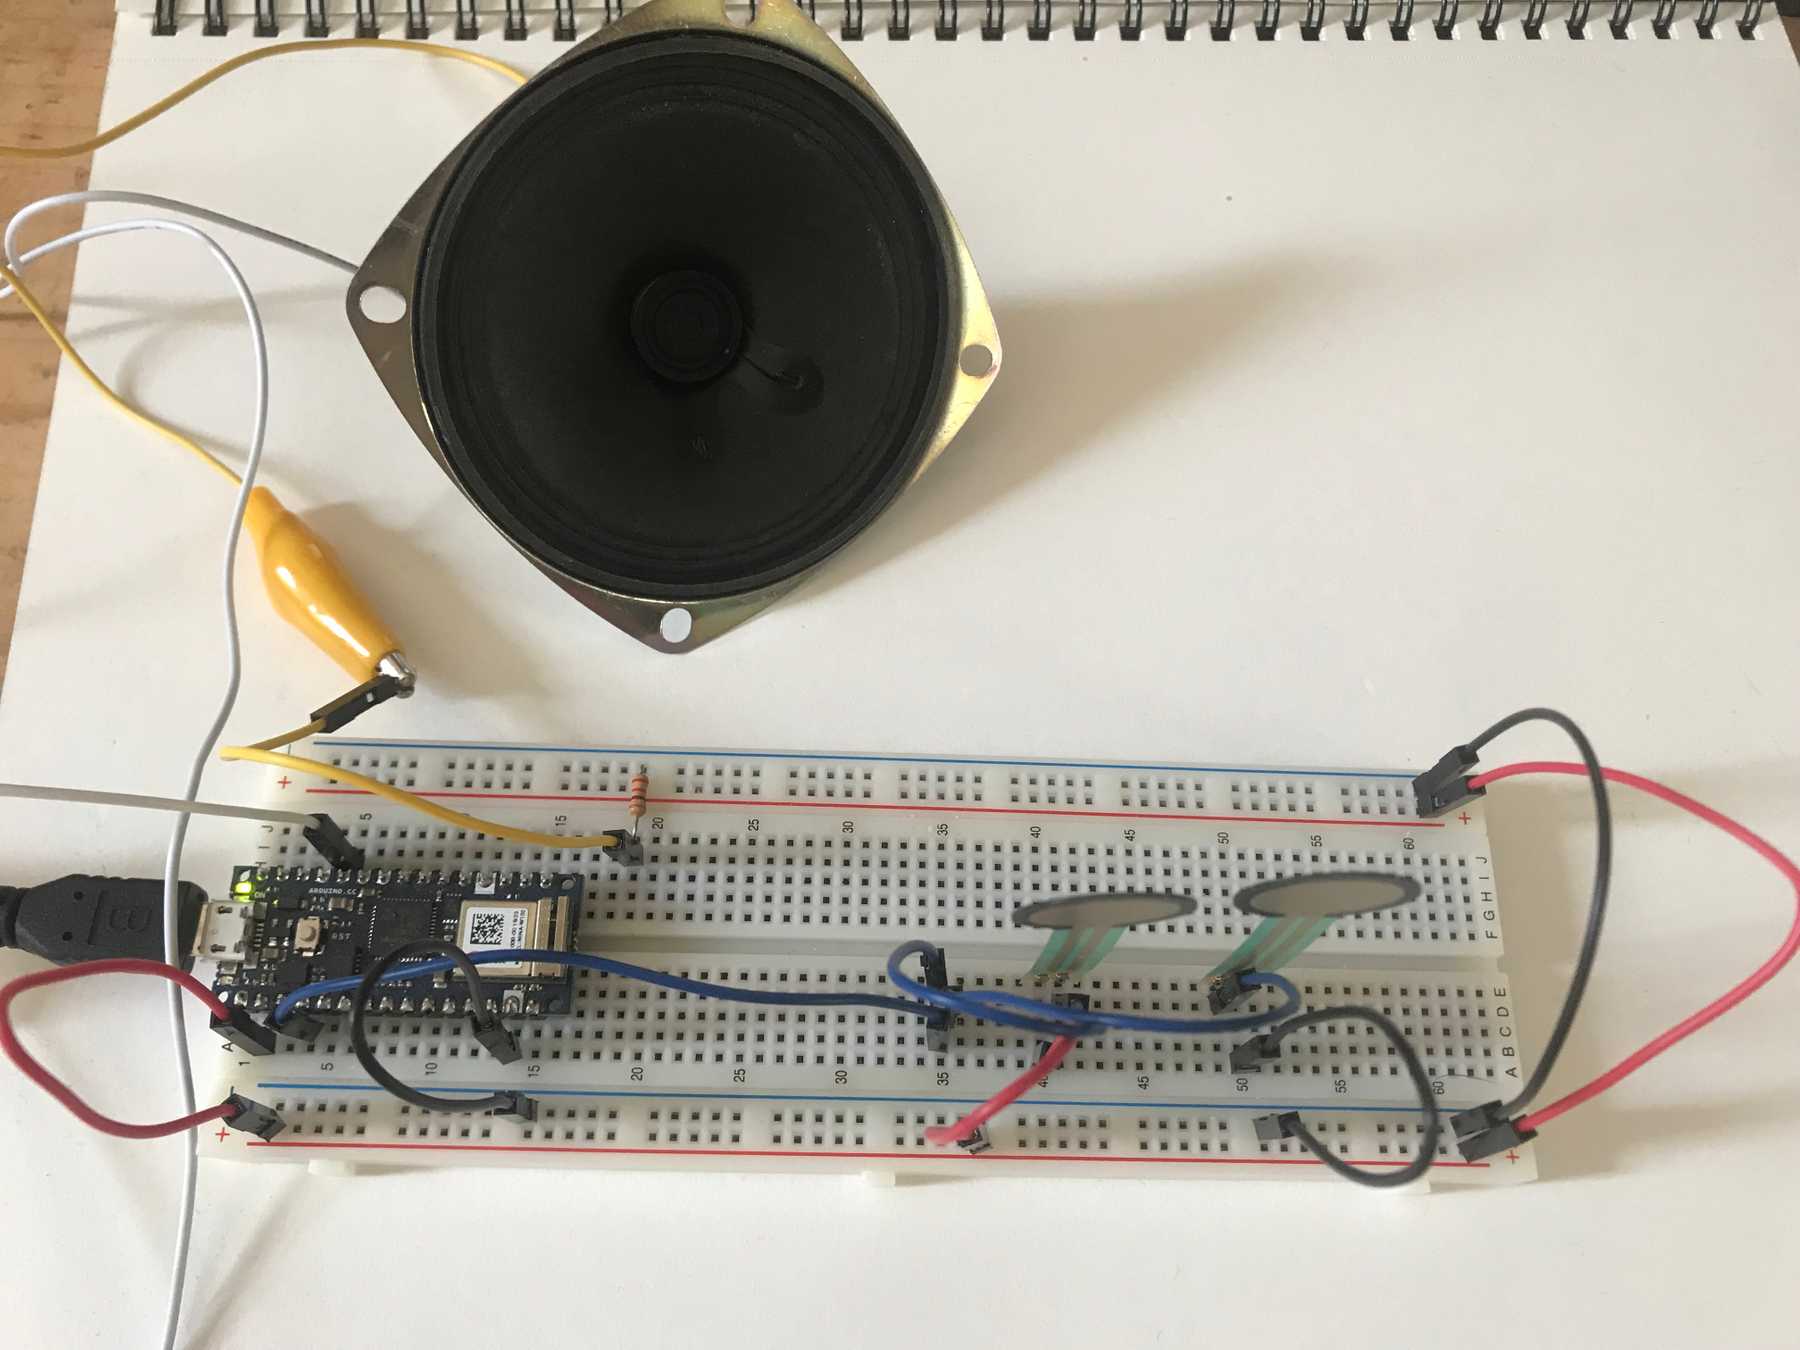 Creating a voltage divider with two FSRs